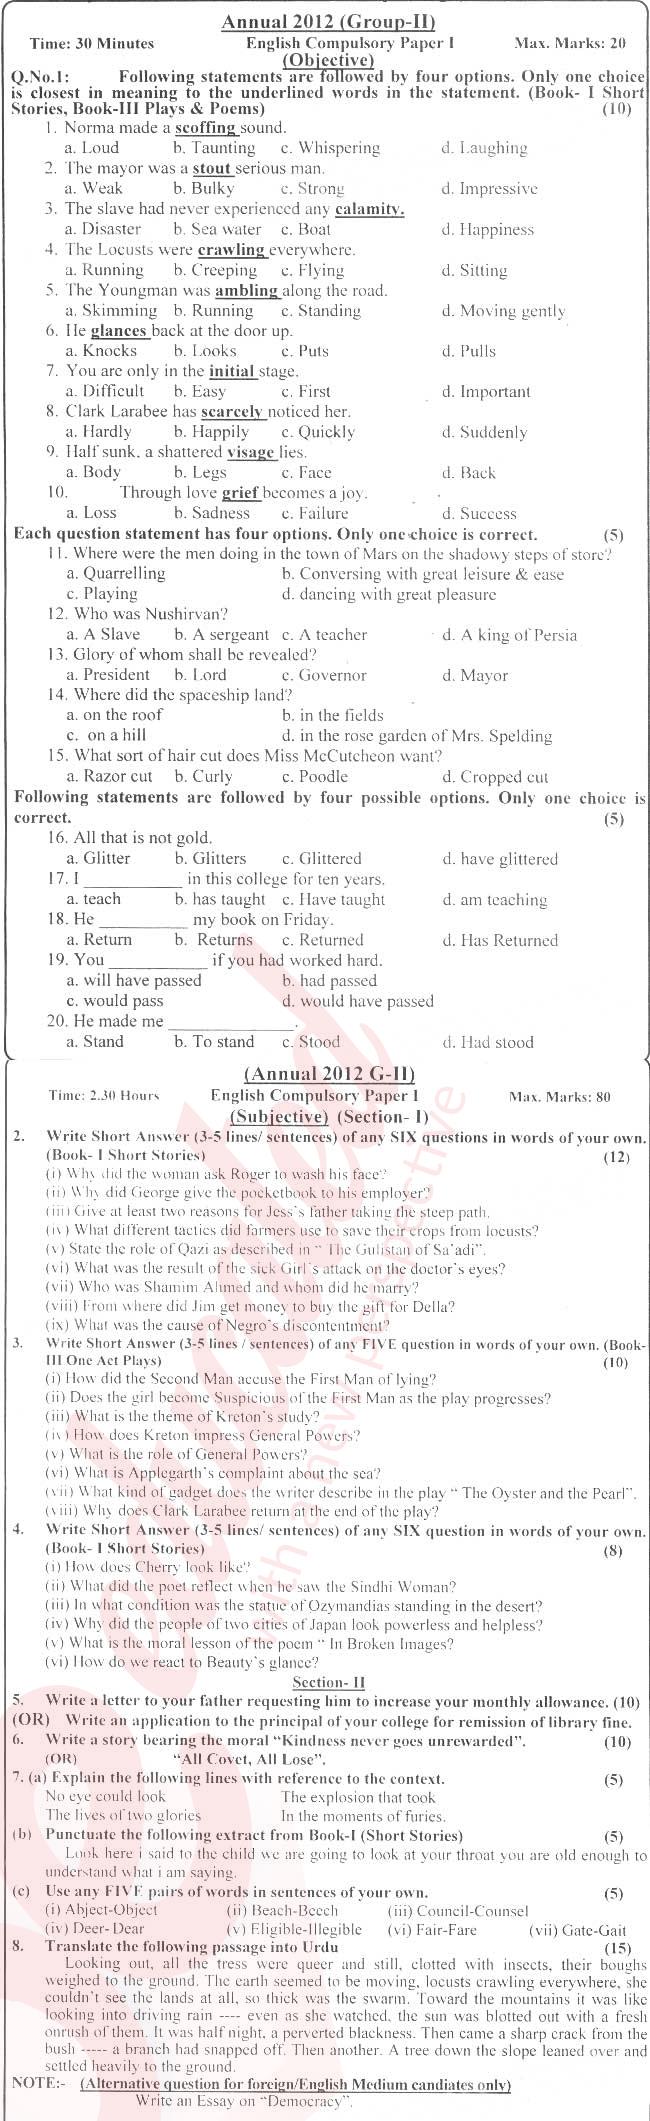 English 11th class Past Paper Group 2 BISE Multan 2012